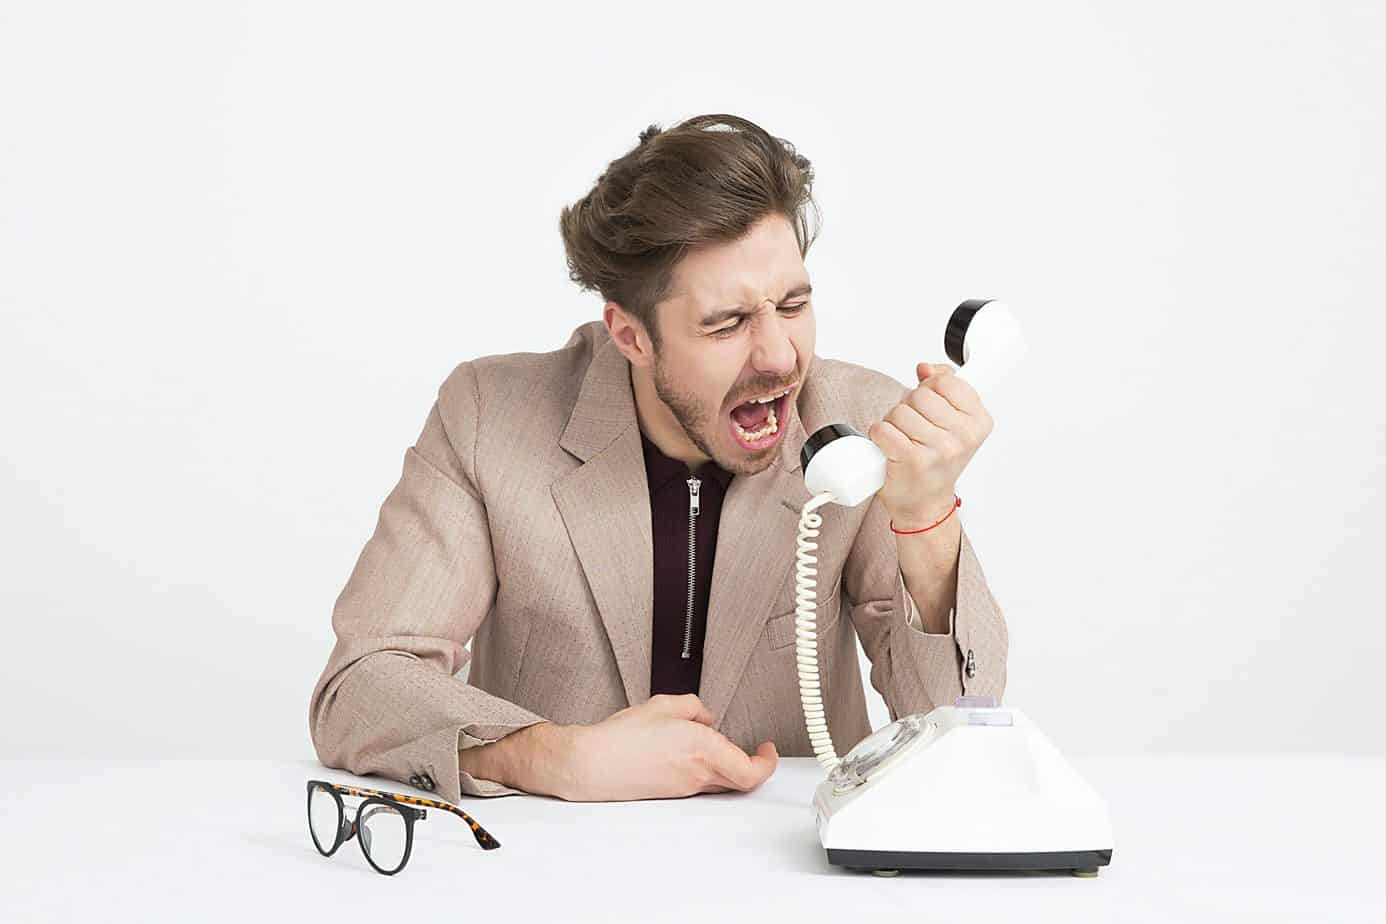 A picture of a person losing his cool while holding a telephone.